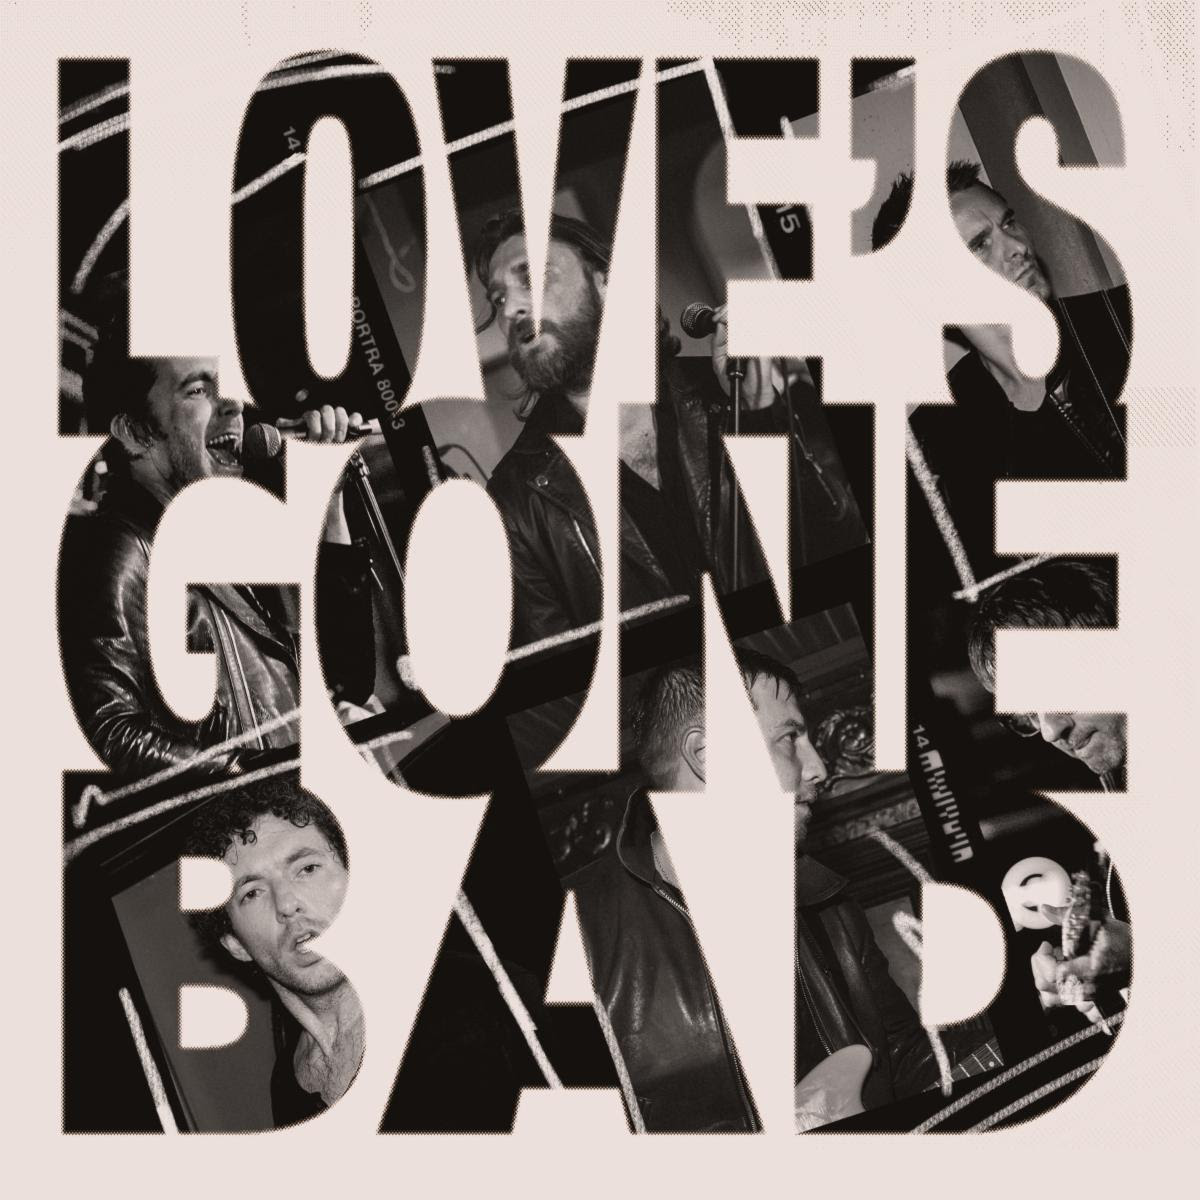 The Jaded Hearts Club share Love's Gone Bad